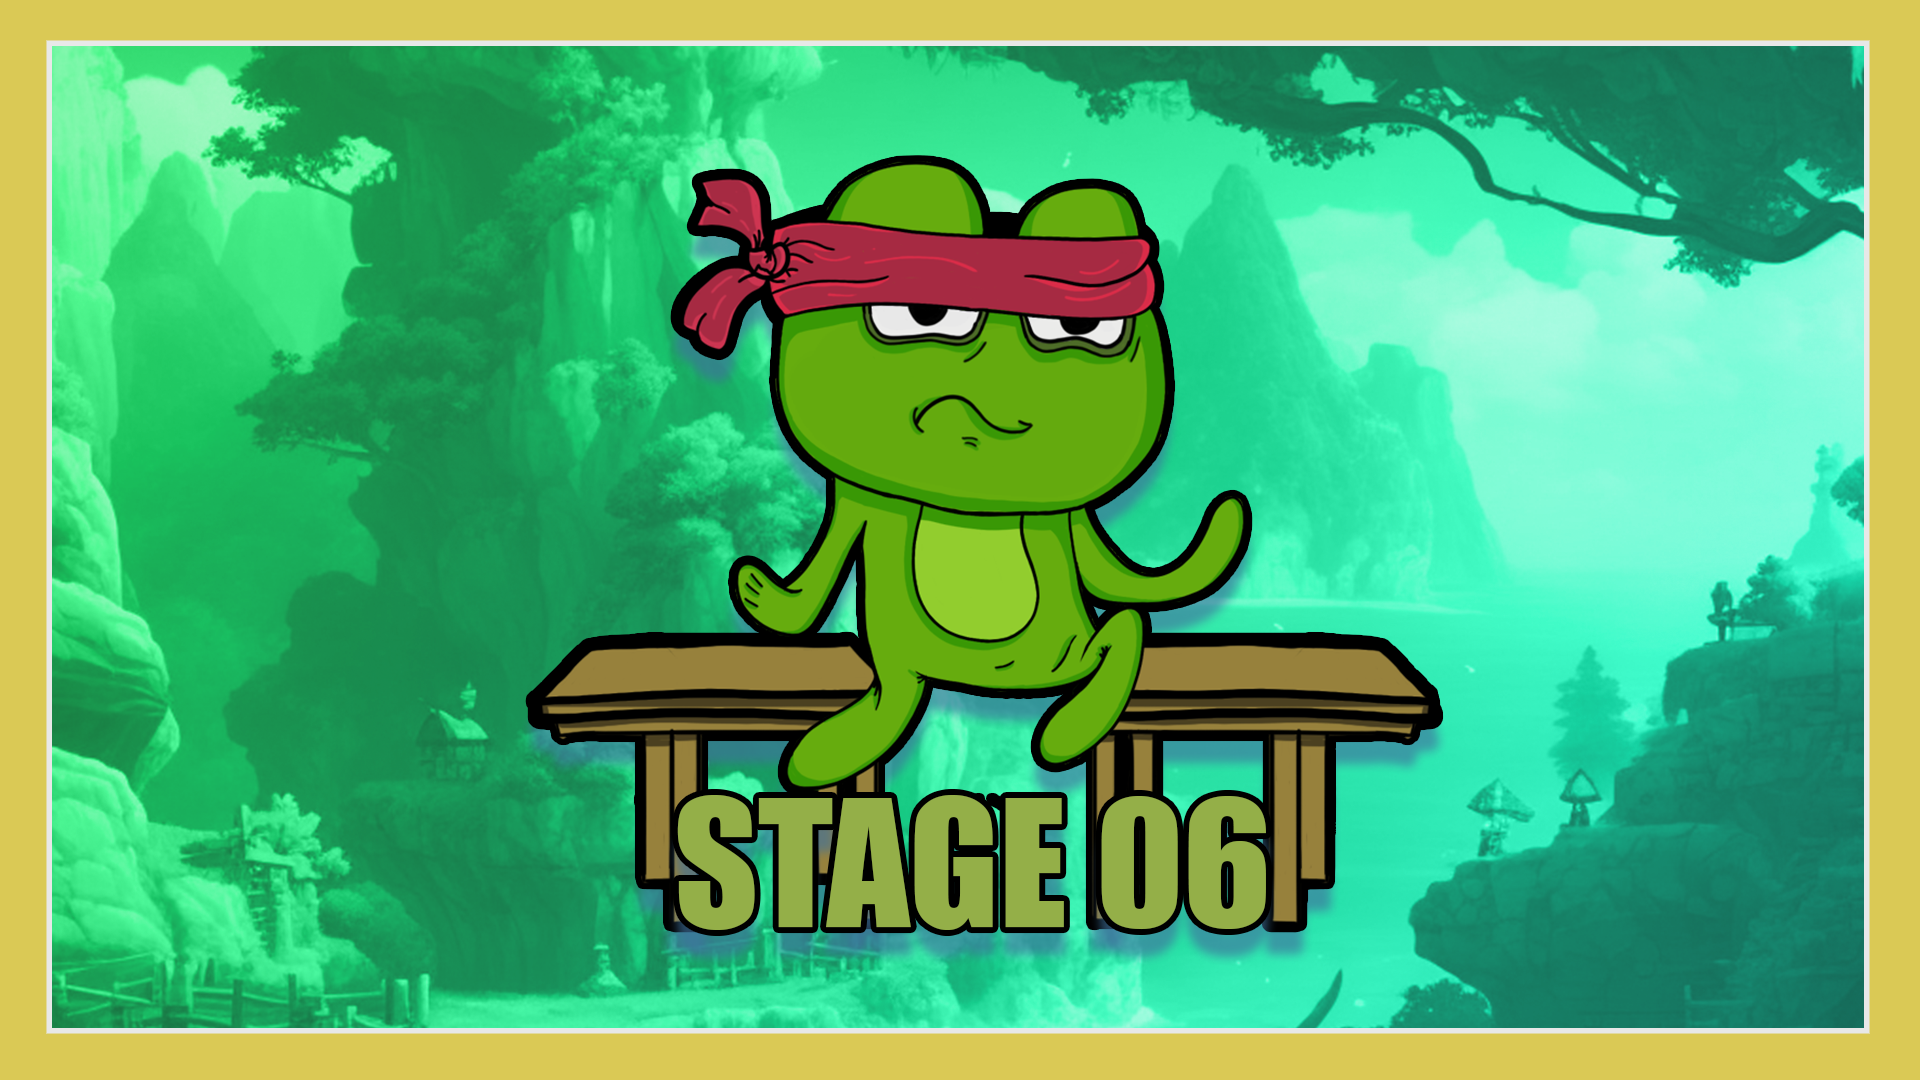 STAGE 06